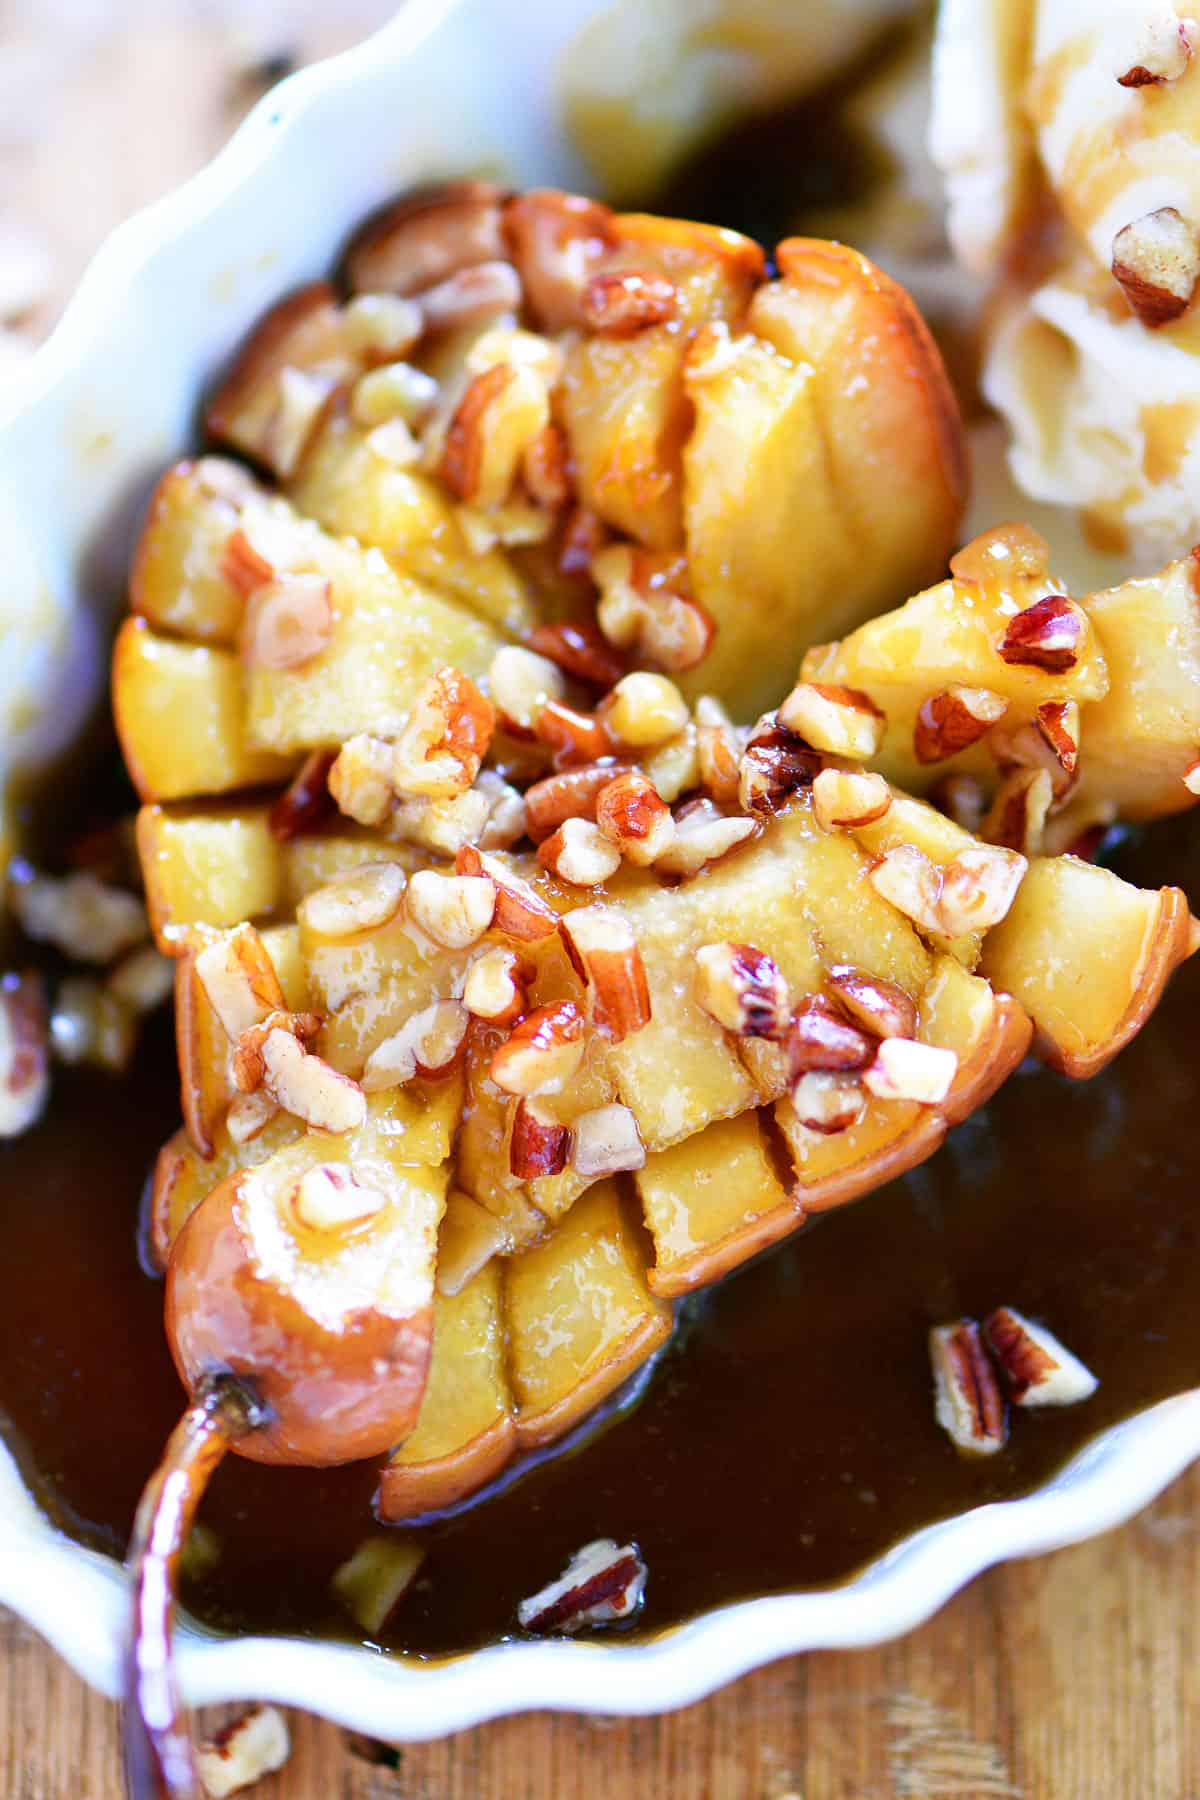 Chopped pecans on a caramel pear in a dish.